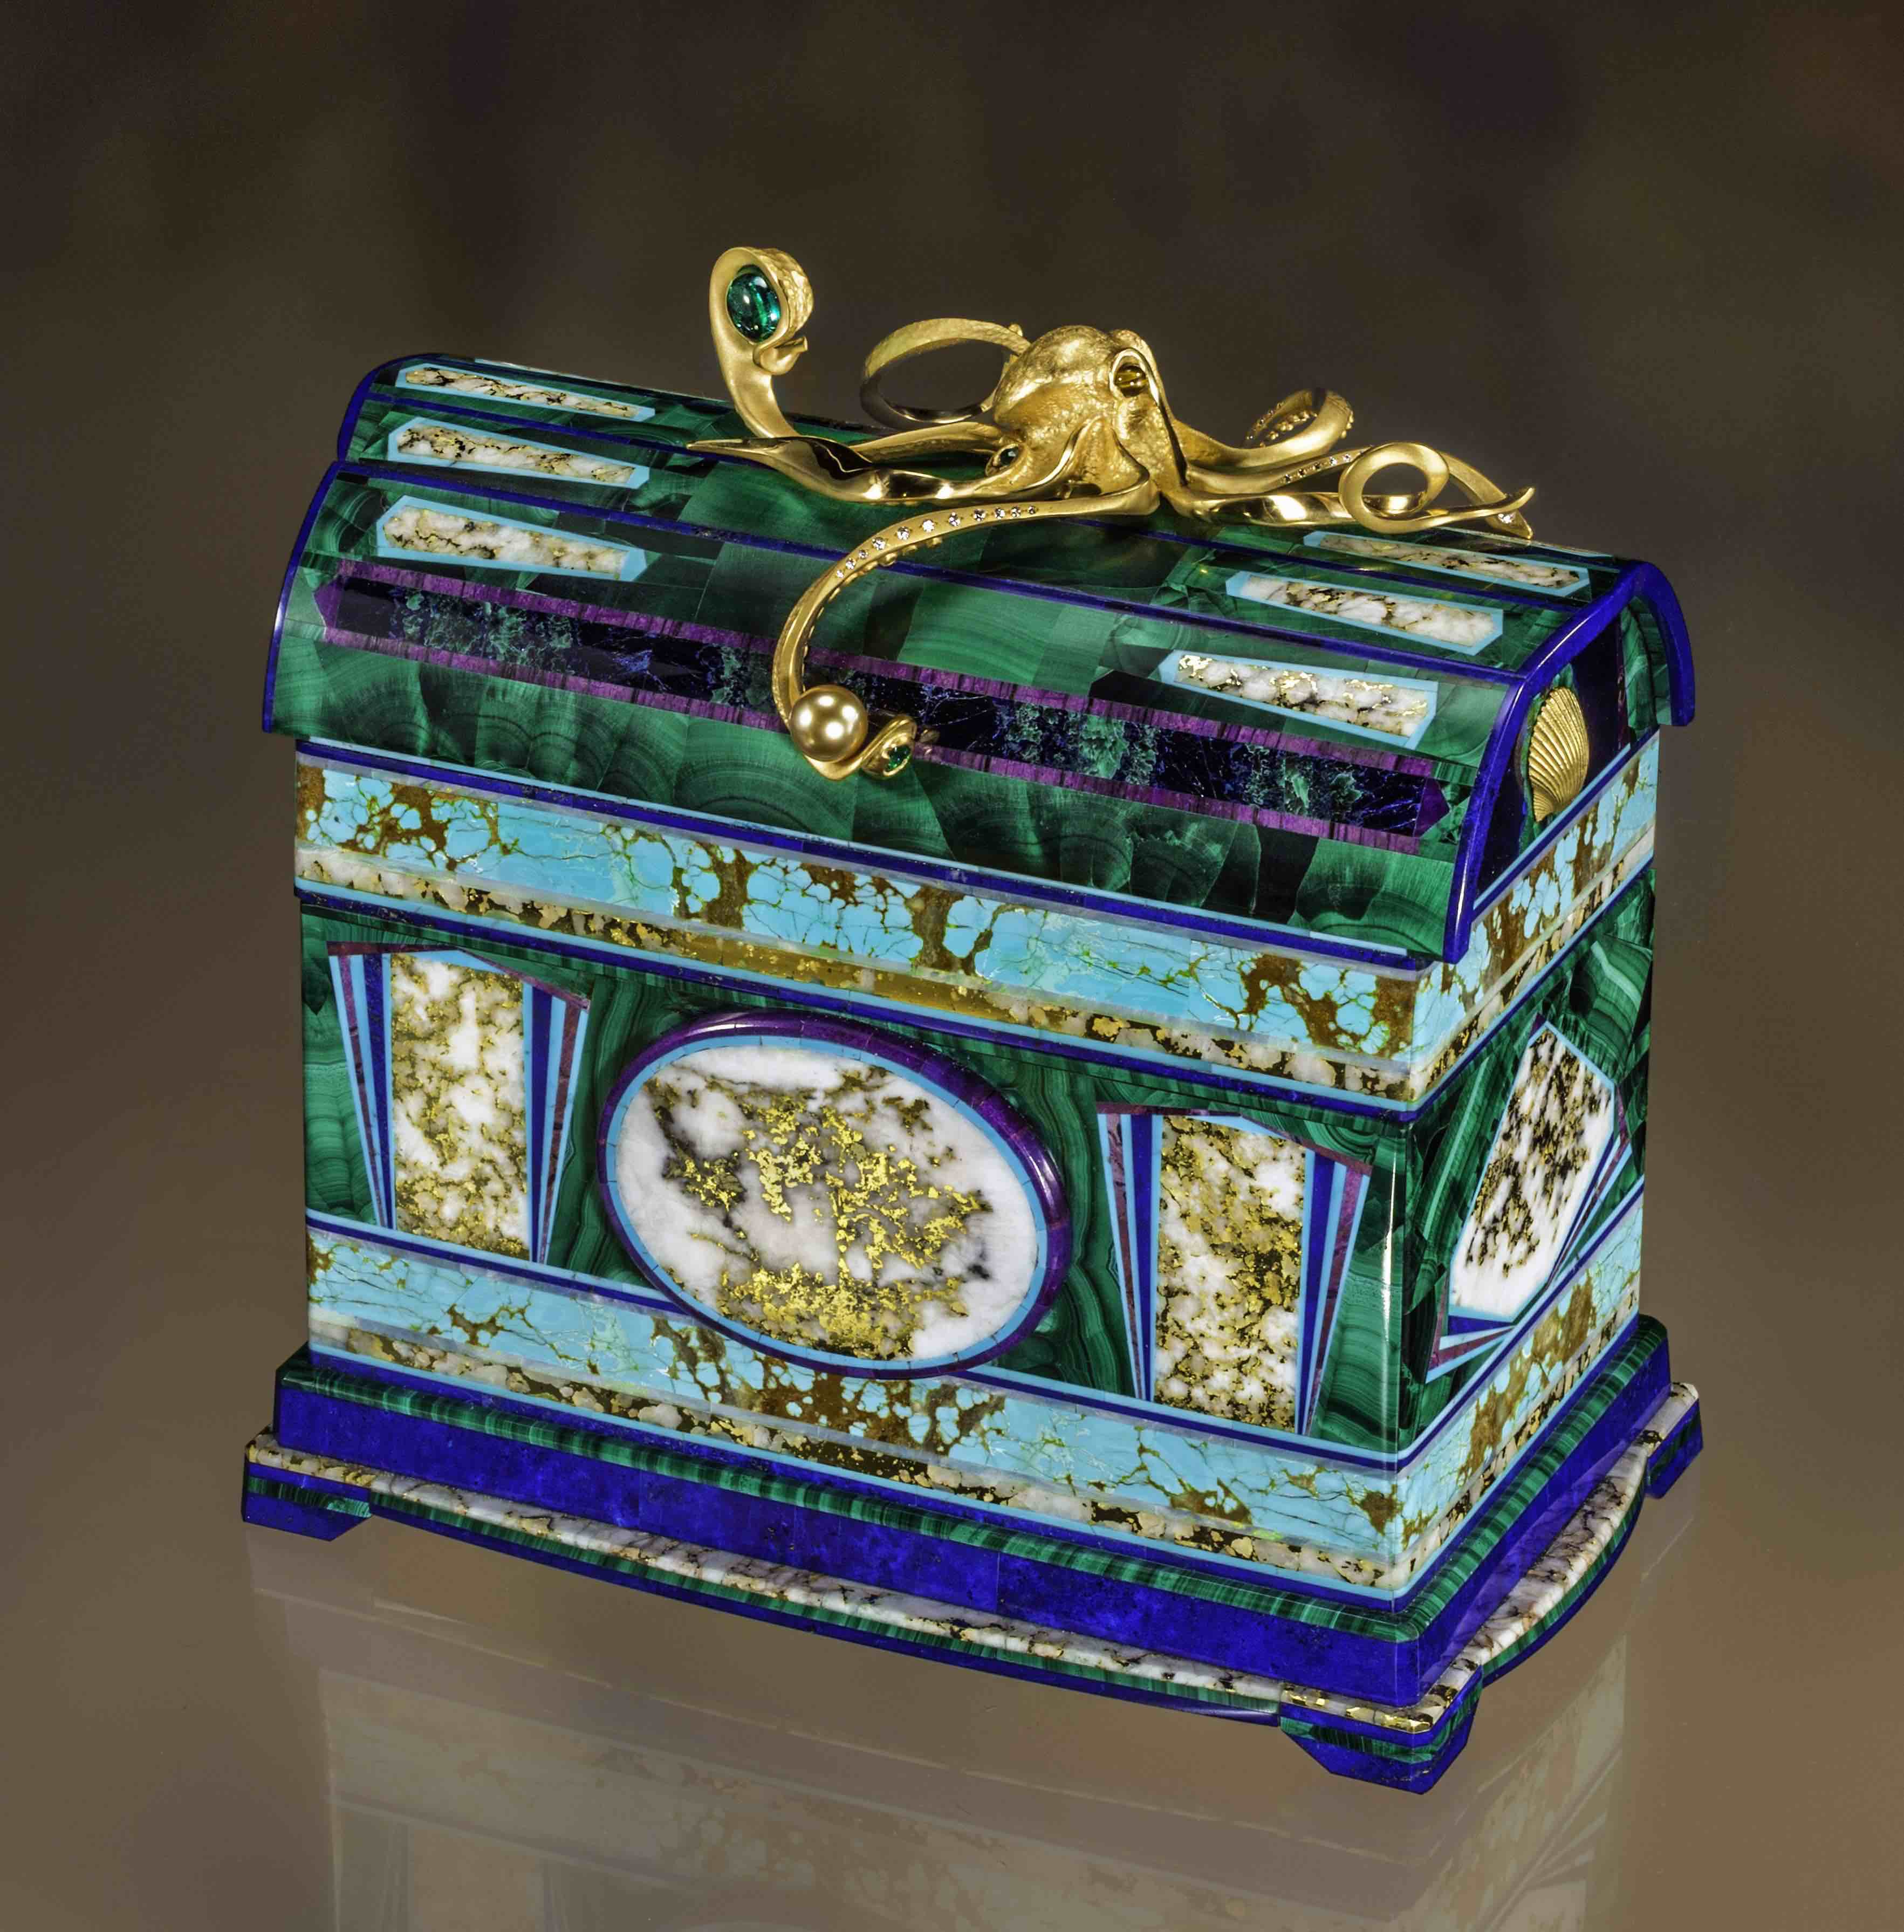 The Treasure Chest Box, by Nicolai Medvedev (in collaboration with Susan Helmich)